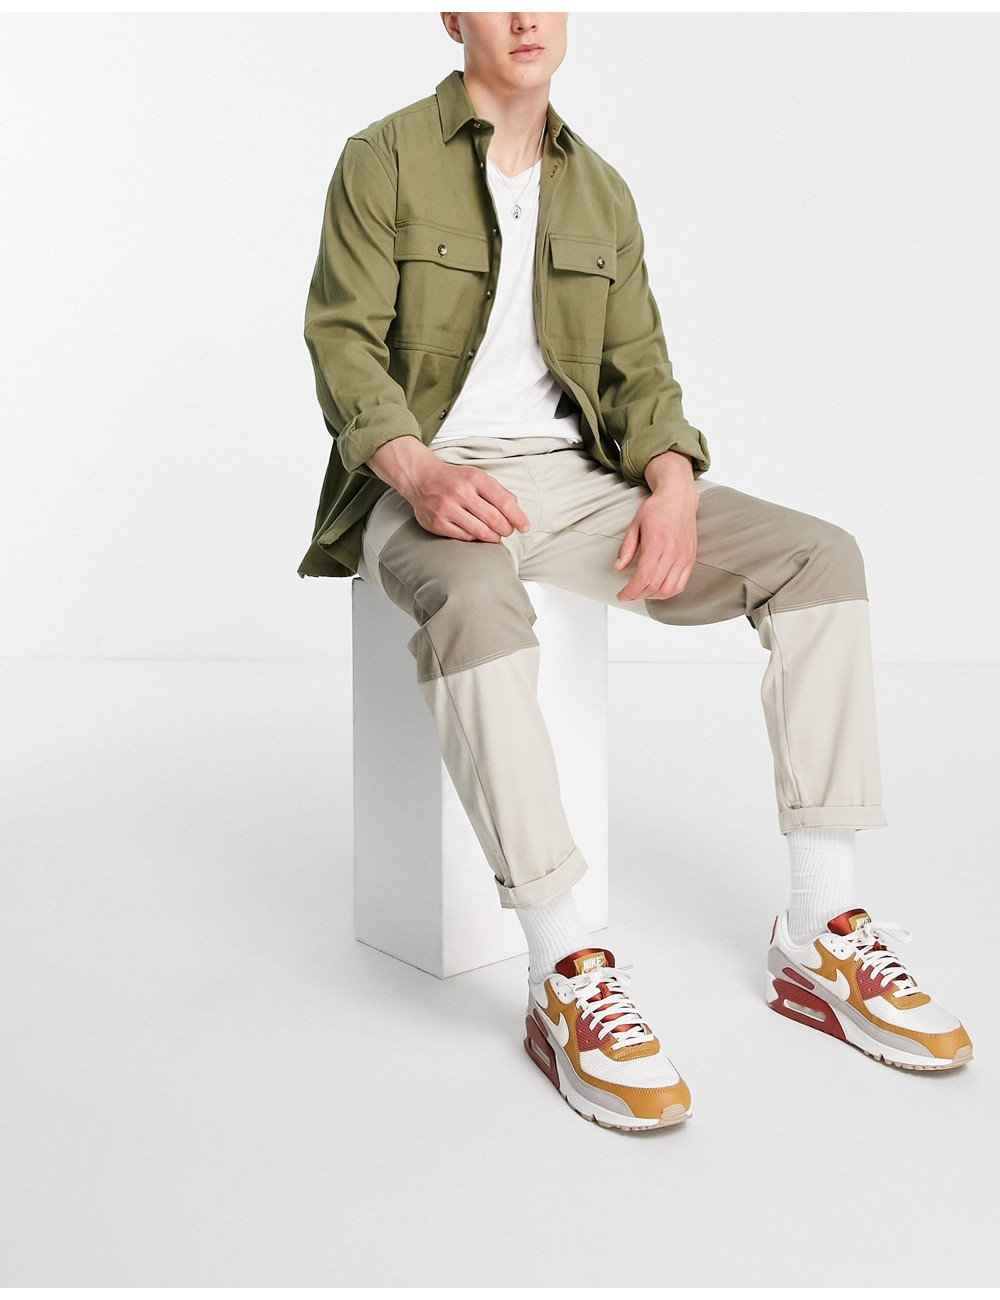 Topman cut and sew relaxed...